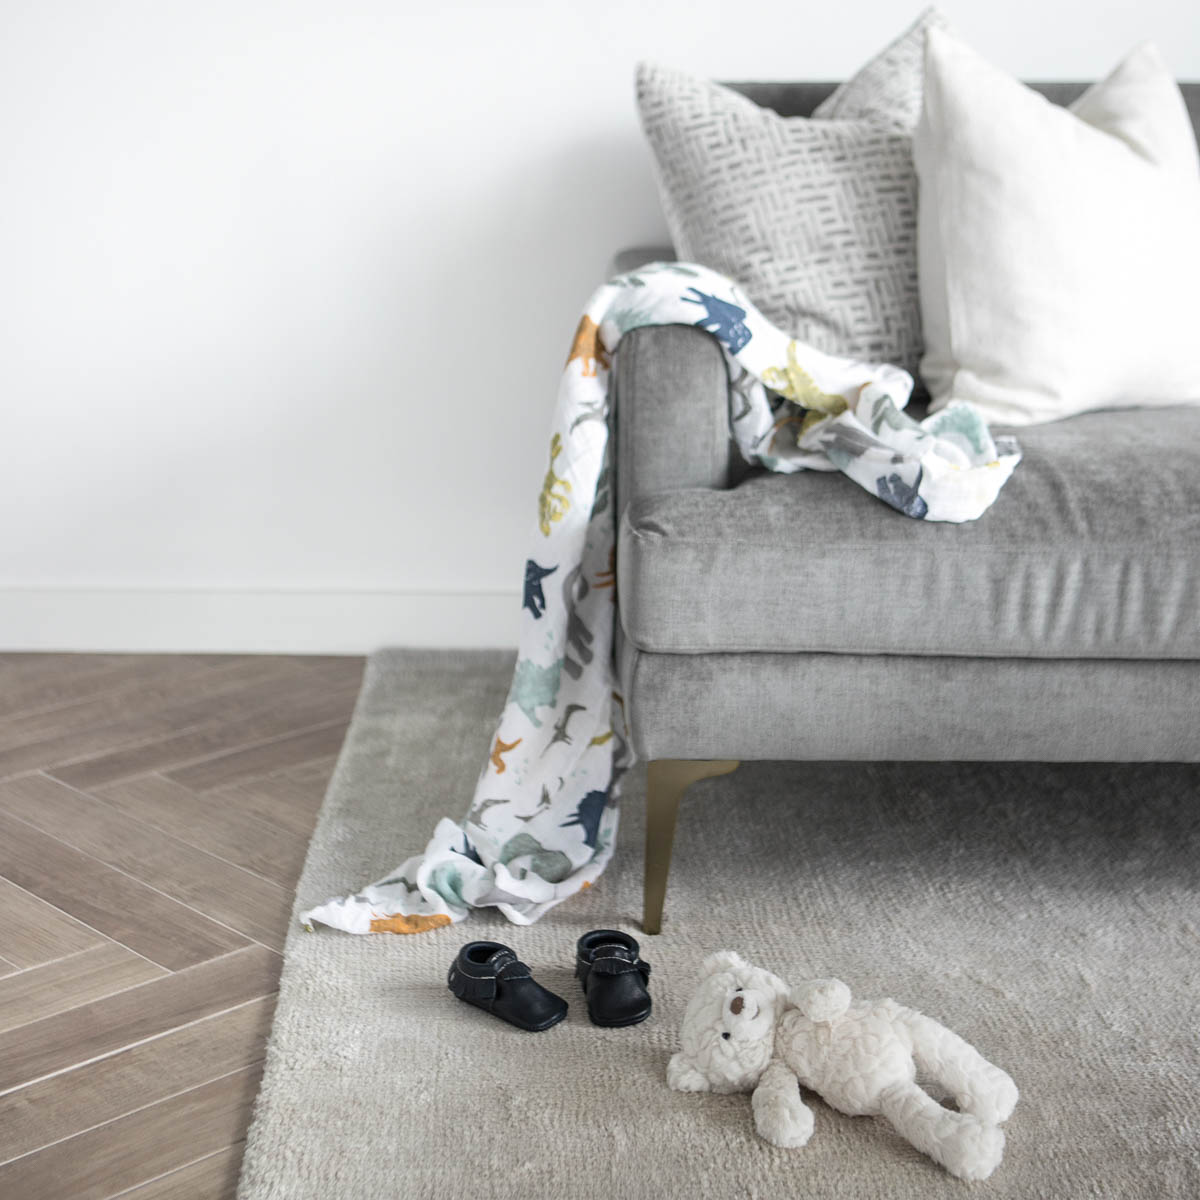 Sofa with a baby or child's blanket laying on it. Toys and a stuffed bear on the floor.